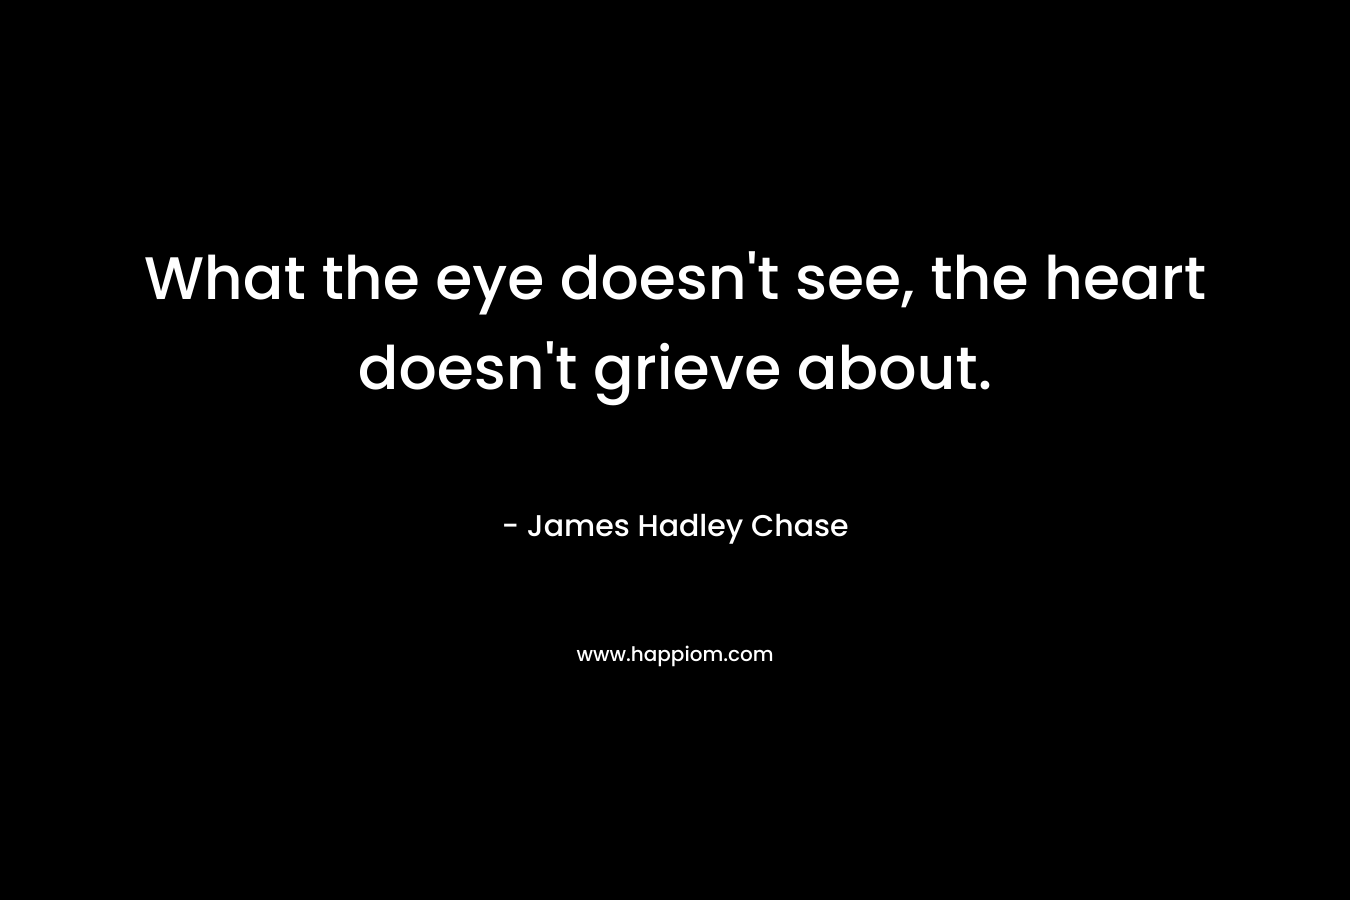 What the eye doesn’t see, the heart doesn’t grieve about. – James Hadley Chase